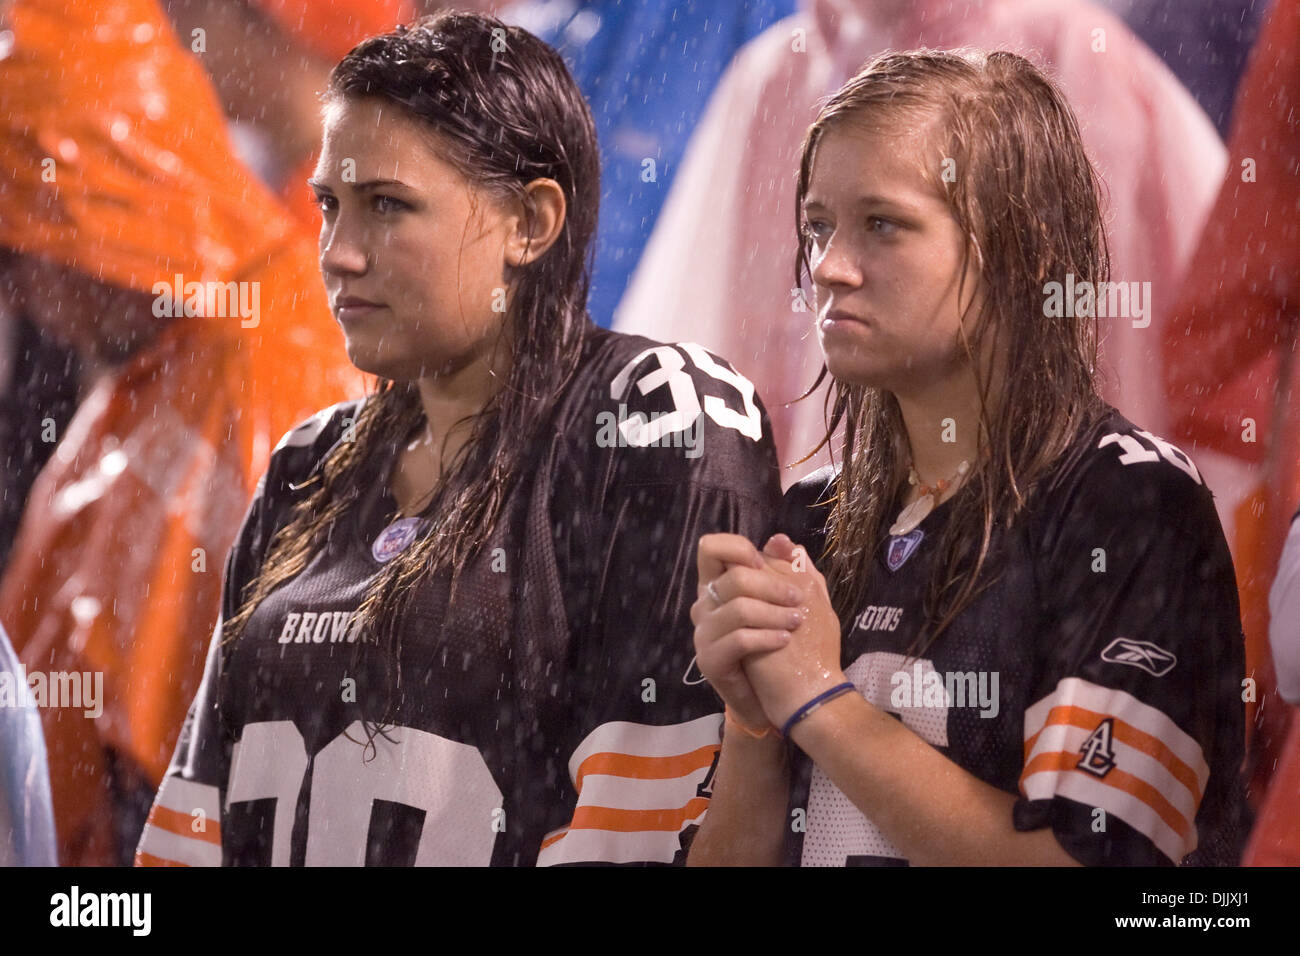 Aug. 21, 2010 - Berea, Ohio, United States of America - Two Cleveland Browns fans show concern as the St. Louis Rams drive toward the end zone during the game against the St. Louis Rams played in the rain at Cleveland Browns Stadium.  The Rams defeated the Browns 19-17.  Mandatory Credit: Frank Jansky / Southcreek Global (Credit Image: © Frank Jamsky/Southcreek Global/ZUMApress.com Stock Photo